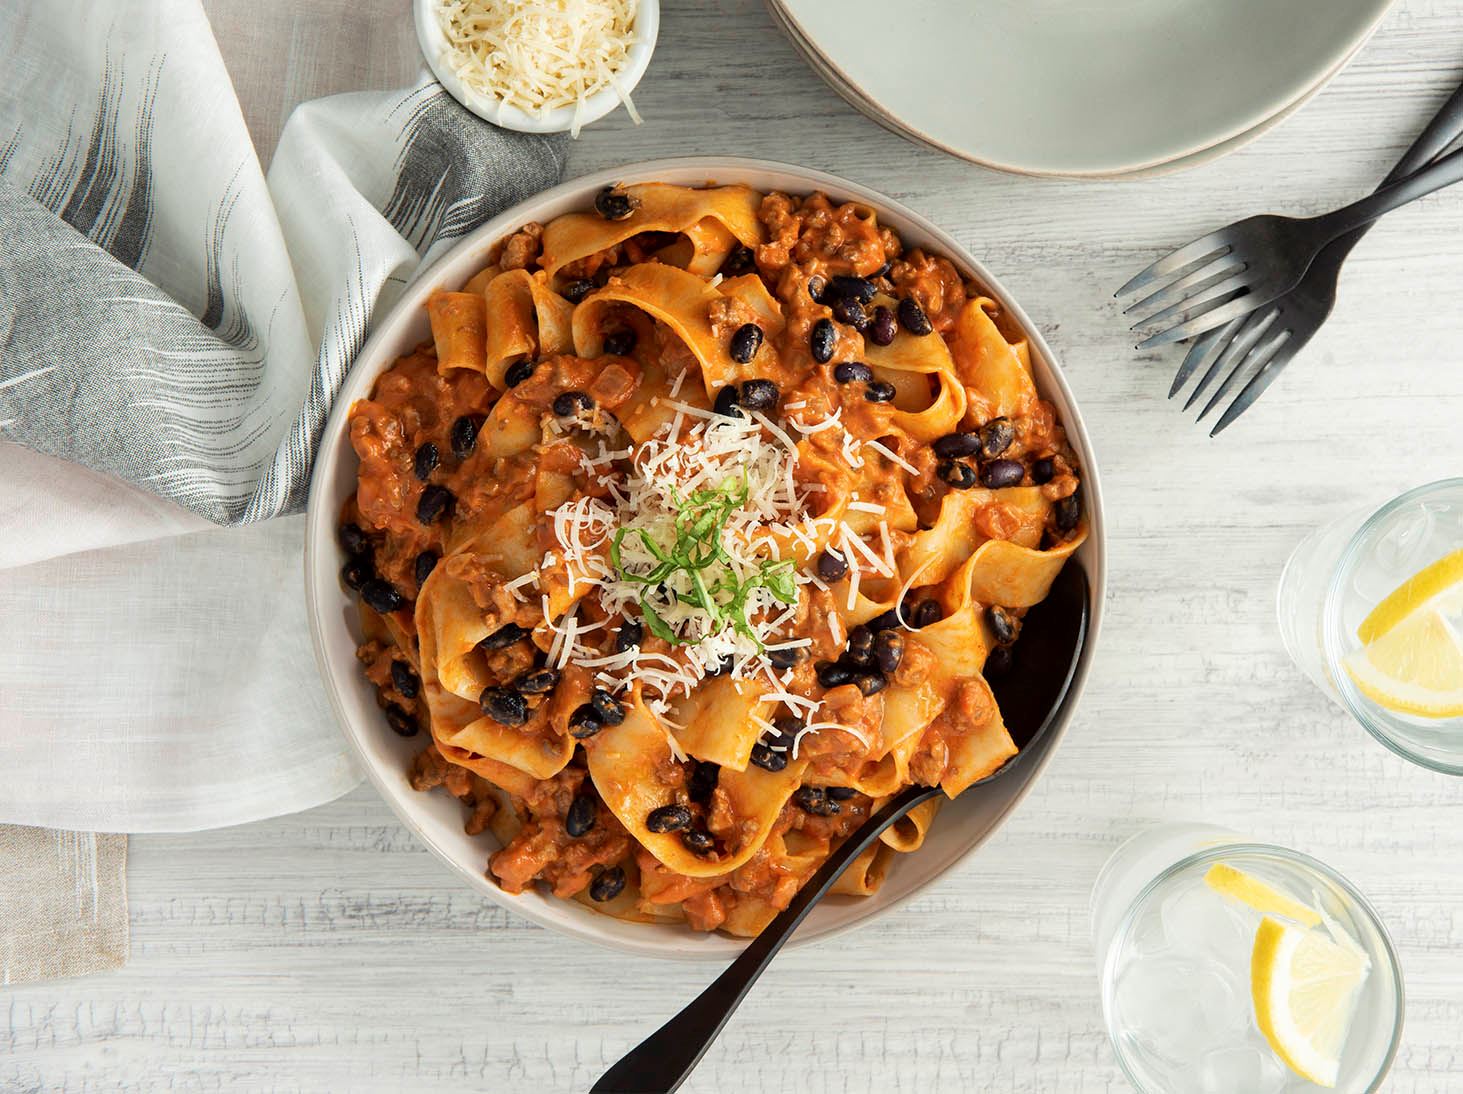 Pappardelle with Black Beans, Mushrooms and Bolognese Sauce